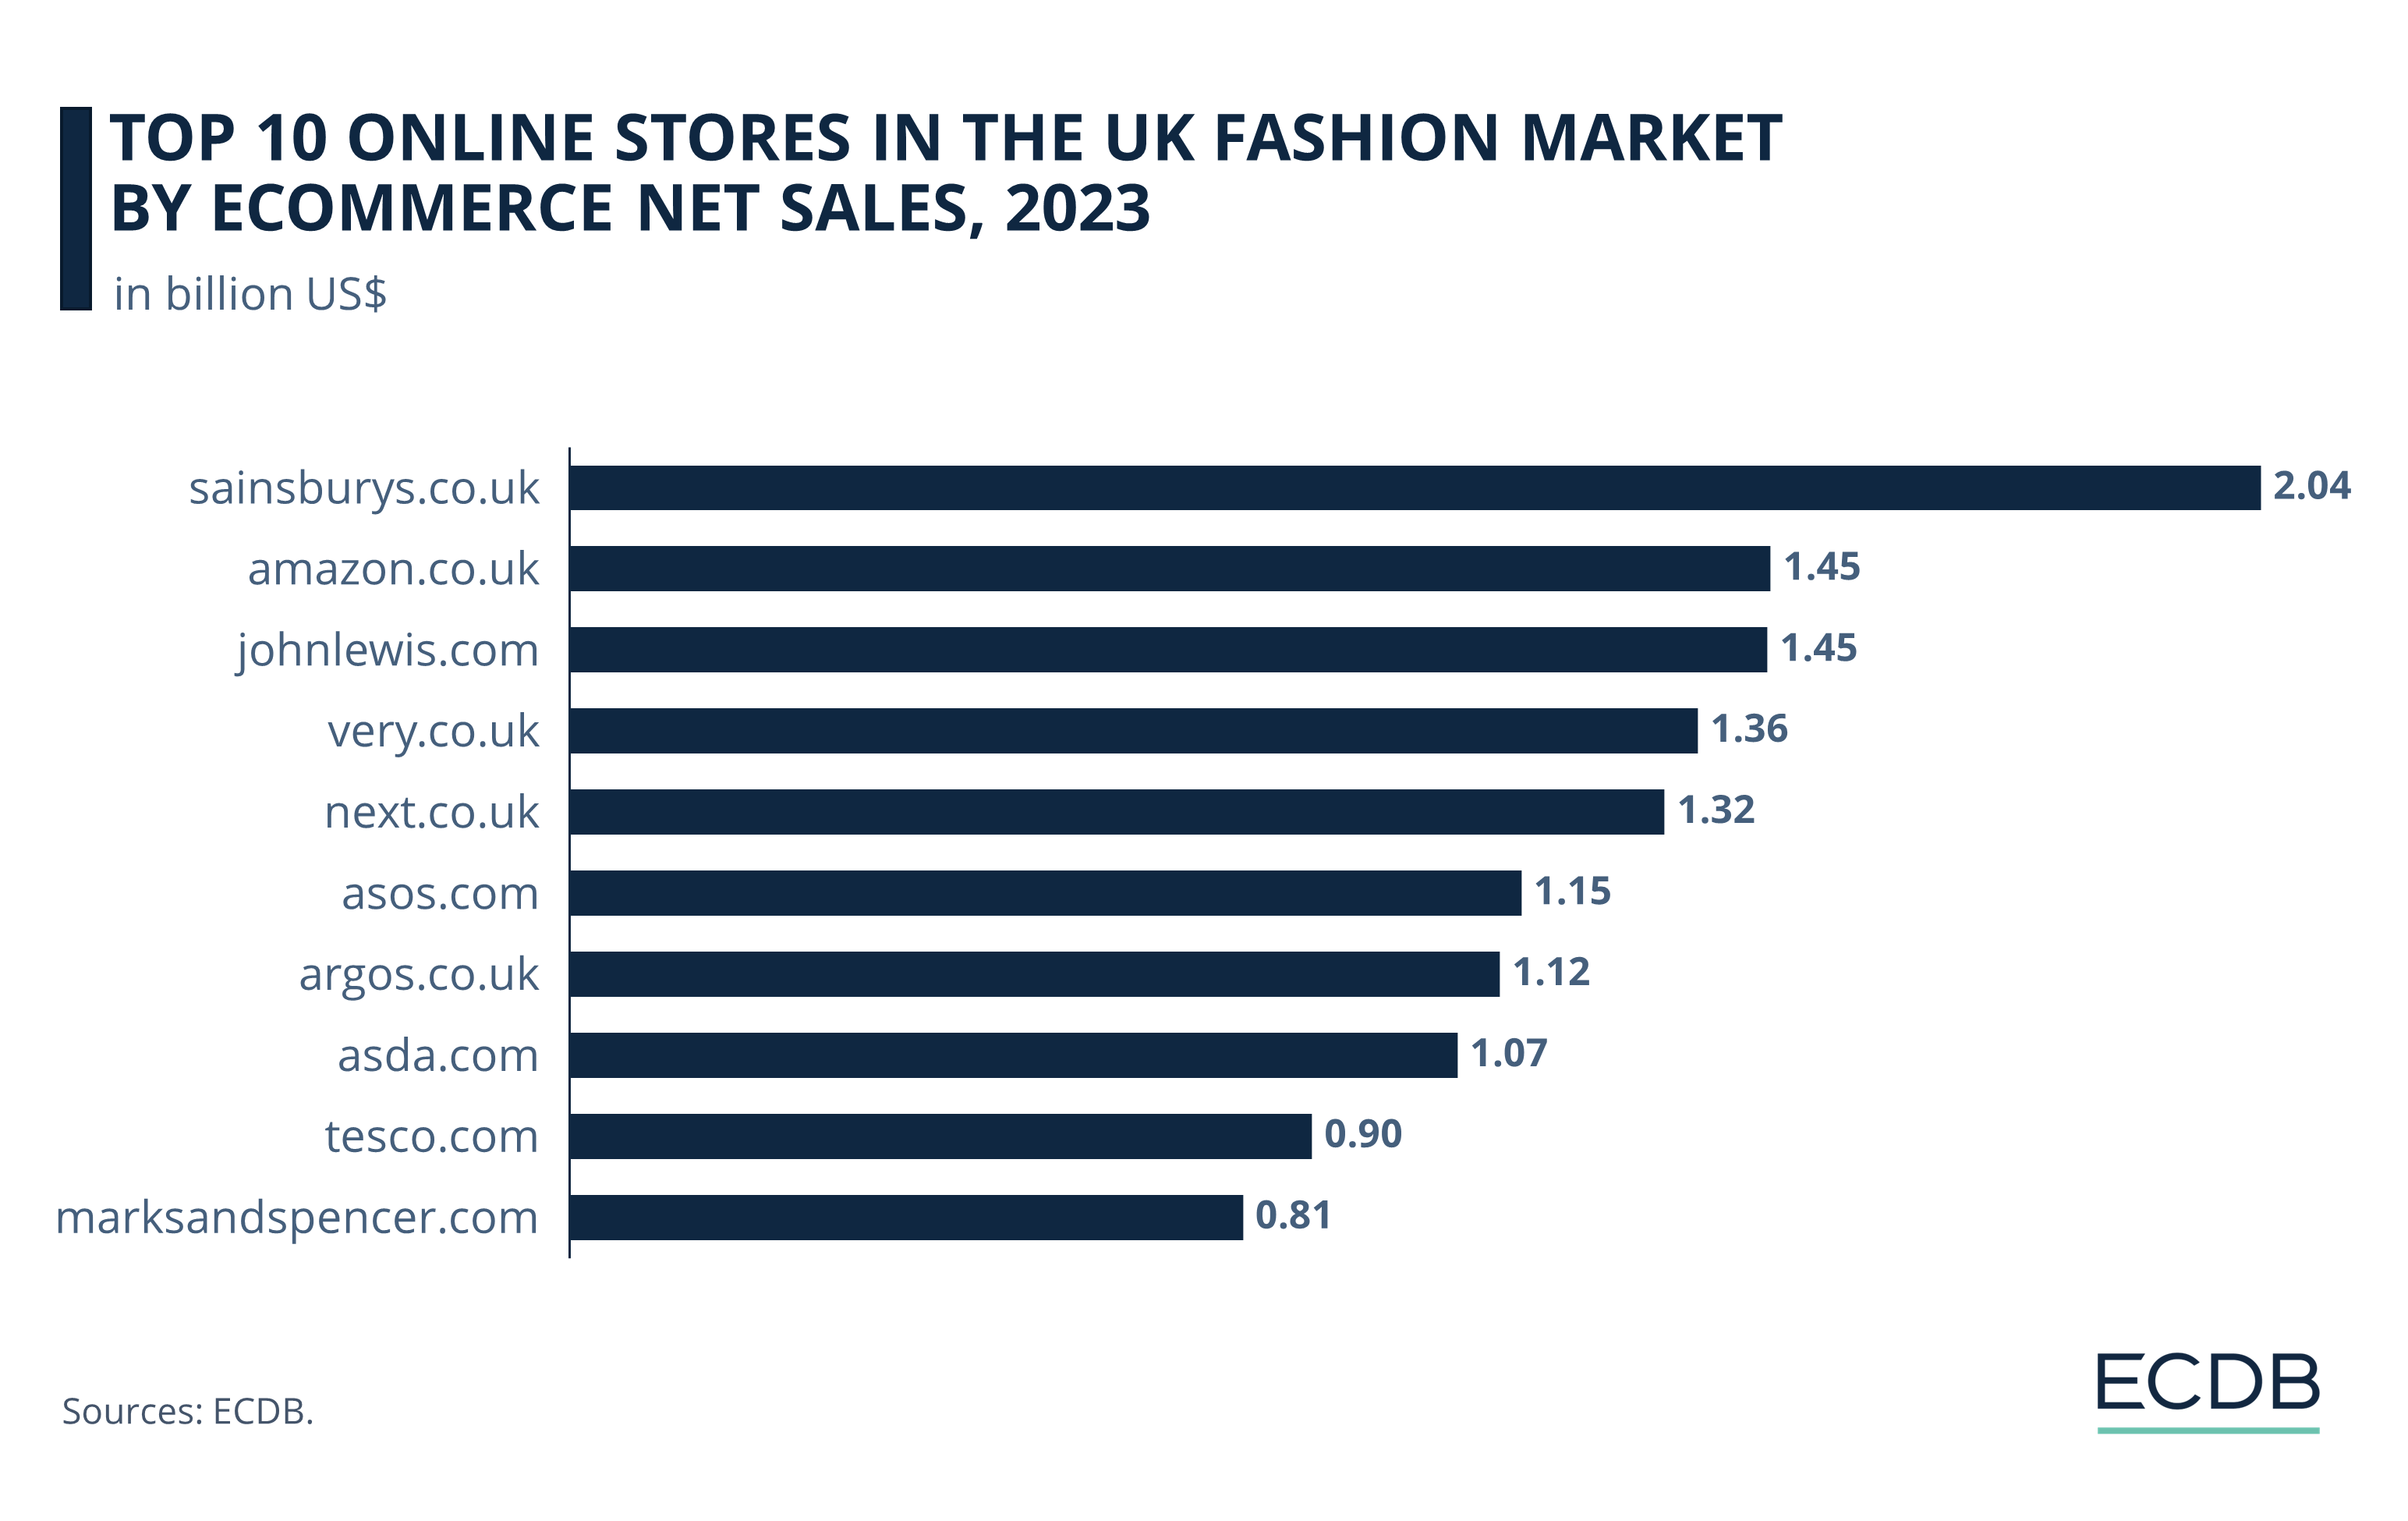 Top 10 Online Stores in the UK Fashion Market by eCommerce Net Sales, 2023